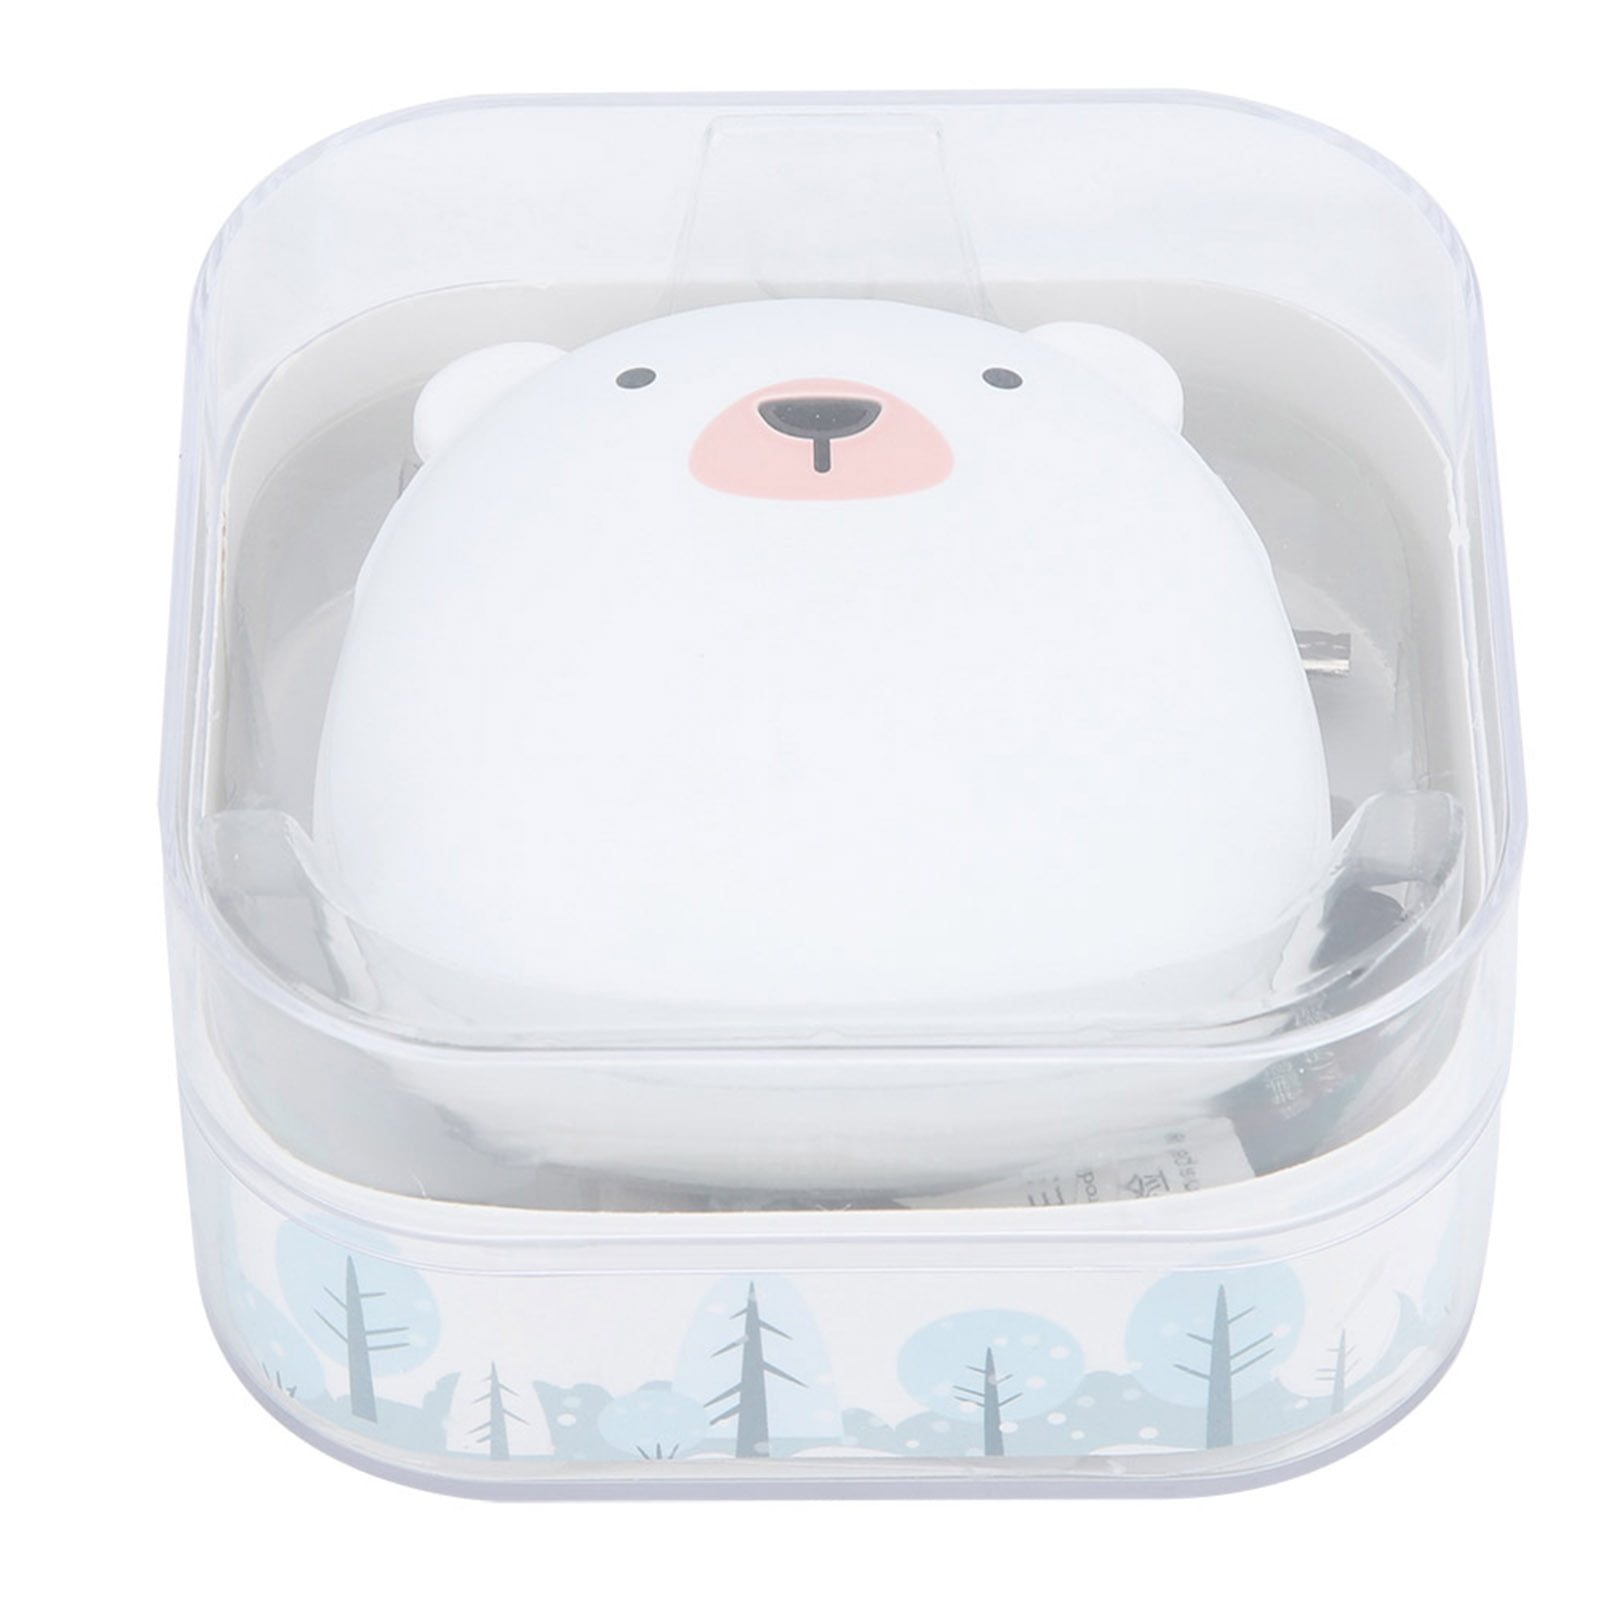 Large Capacity Portable Cute Animal Shape USB Rechargeable Hand Warmer Mini Power Bank for Home Office Use